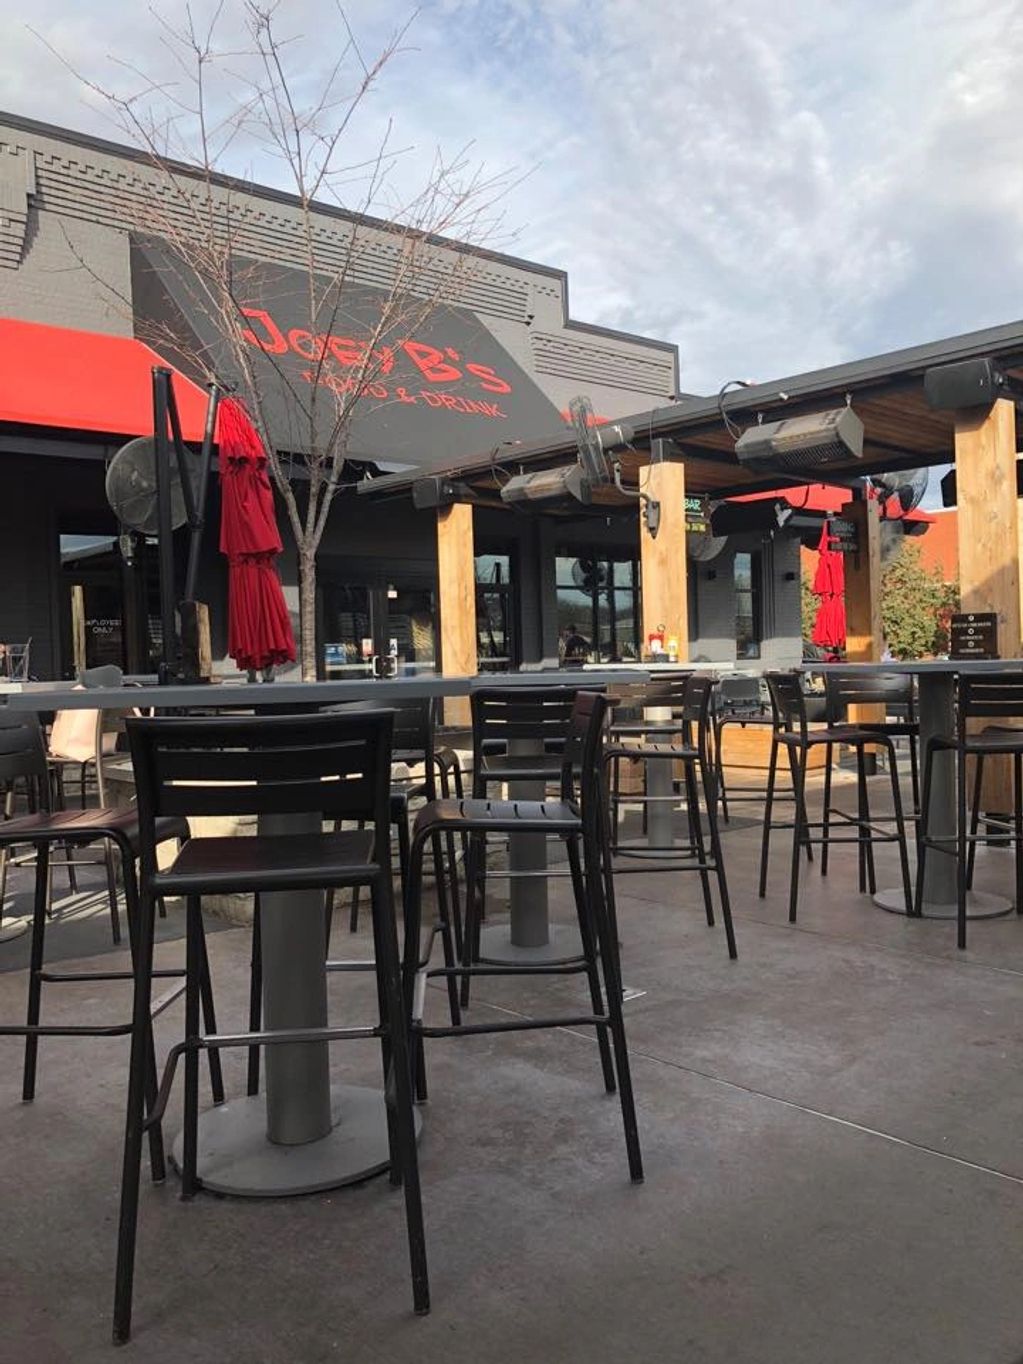 Joey B's Manchester
Winner West County Out And About
Best Patio